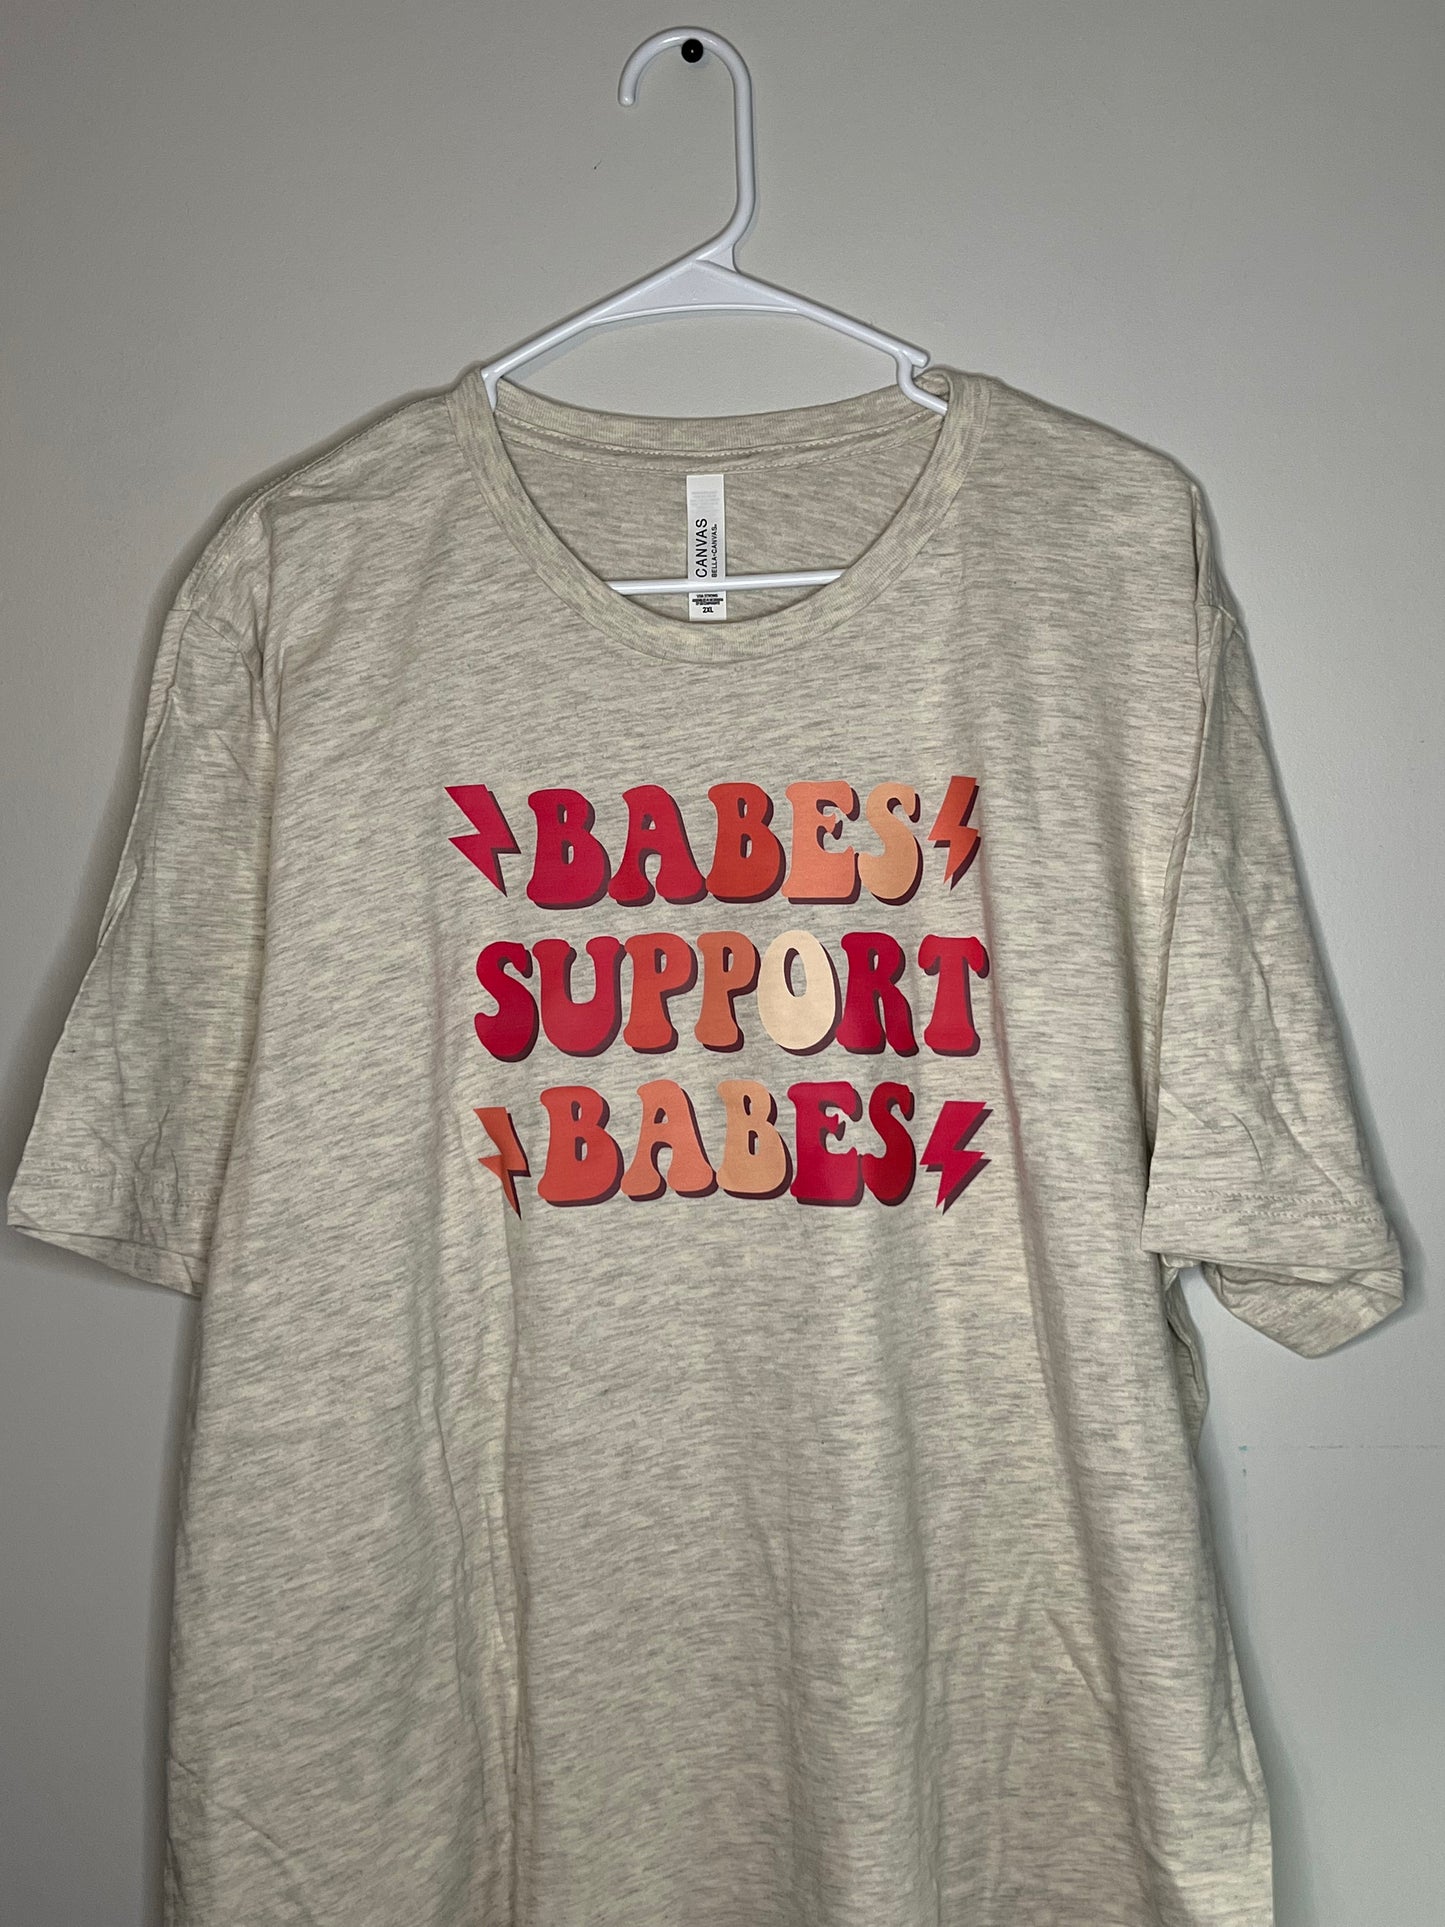 2X - Babes Support Babes